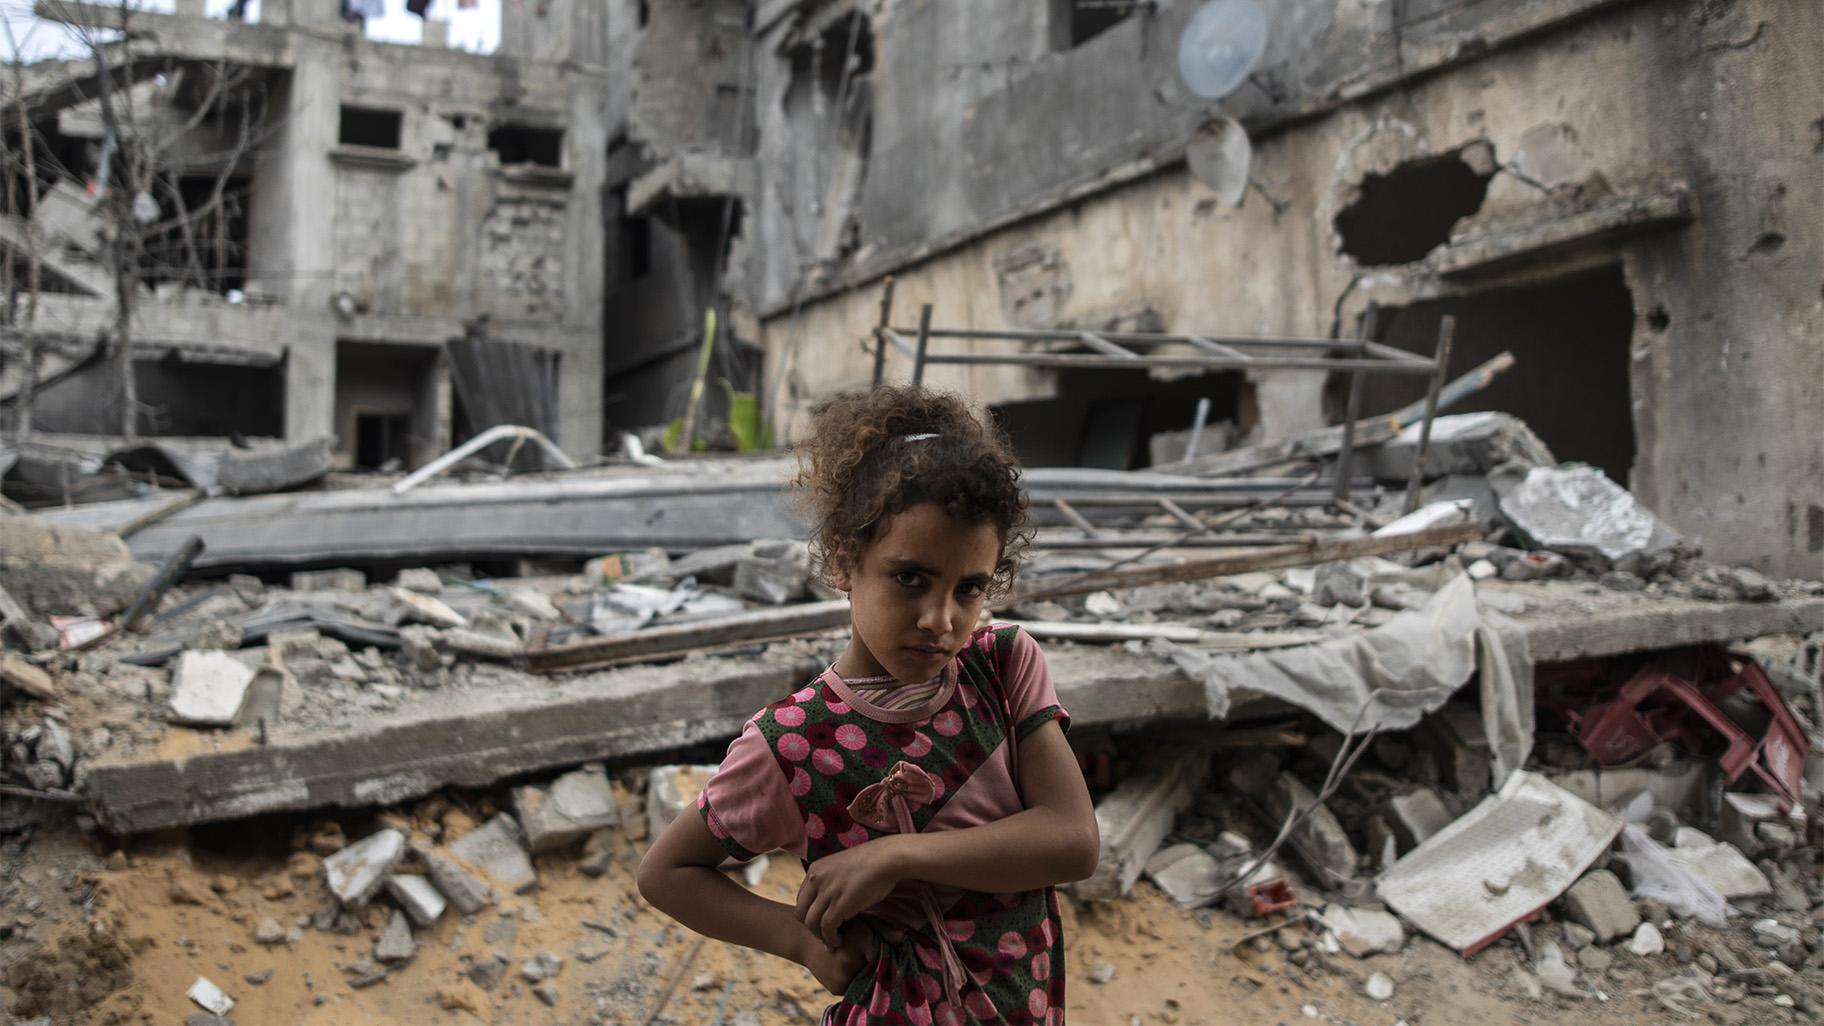 Palestinian Rahaf Nuseir, 10, looks on as she stands in front of her family's destroyed homes, to which they returned following a cease-fire reached after an 11-day war between Gaza's Hamas rulers and Israel, in town of Beit Hanoun, northern Gaza Strip, Friday, May 21, 2021. (AP Photo / Khalil Hamra)